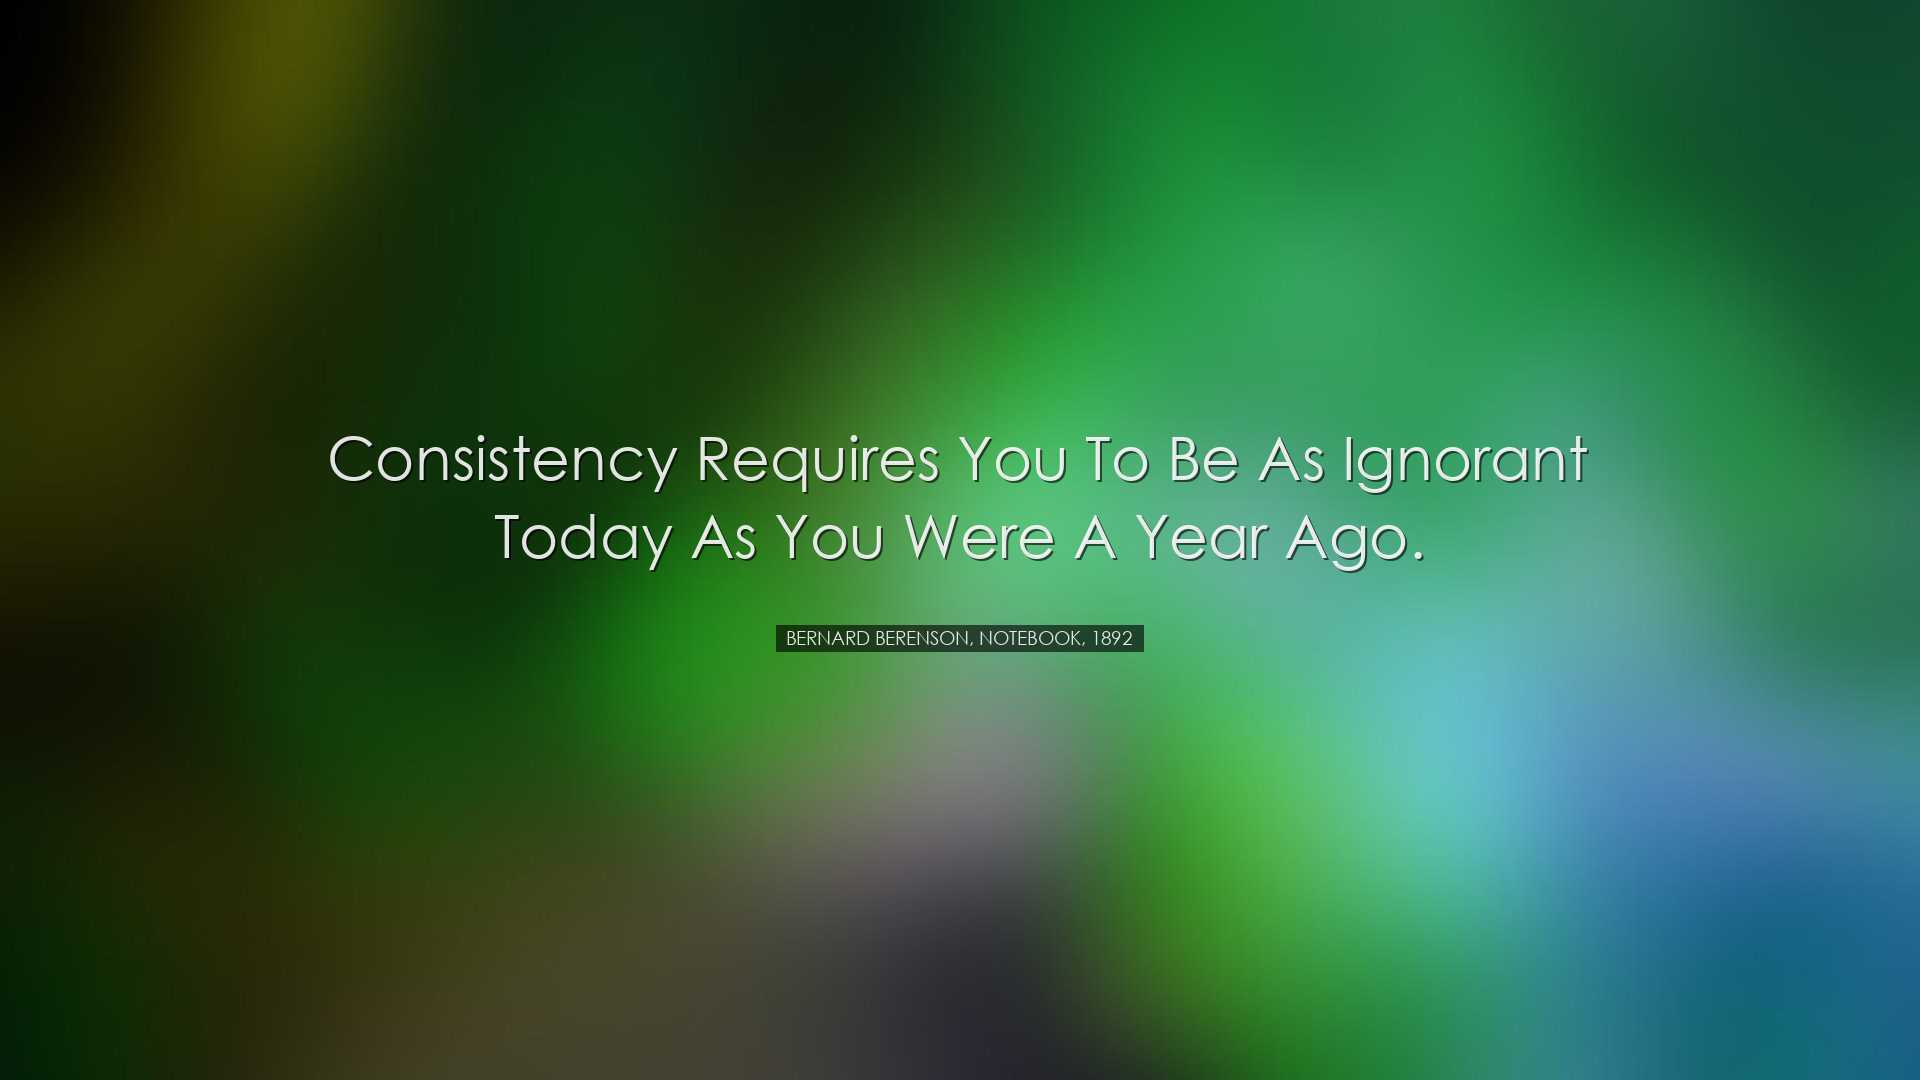 Consistency requires you to be as ignorant today as you were a yea